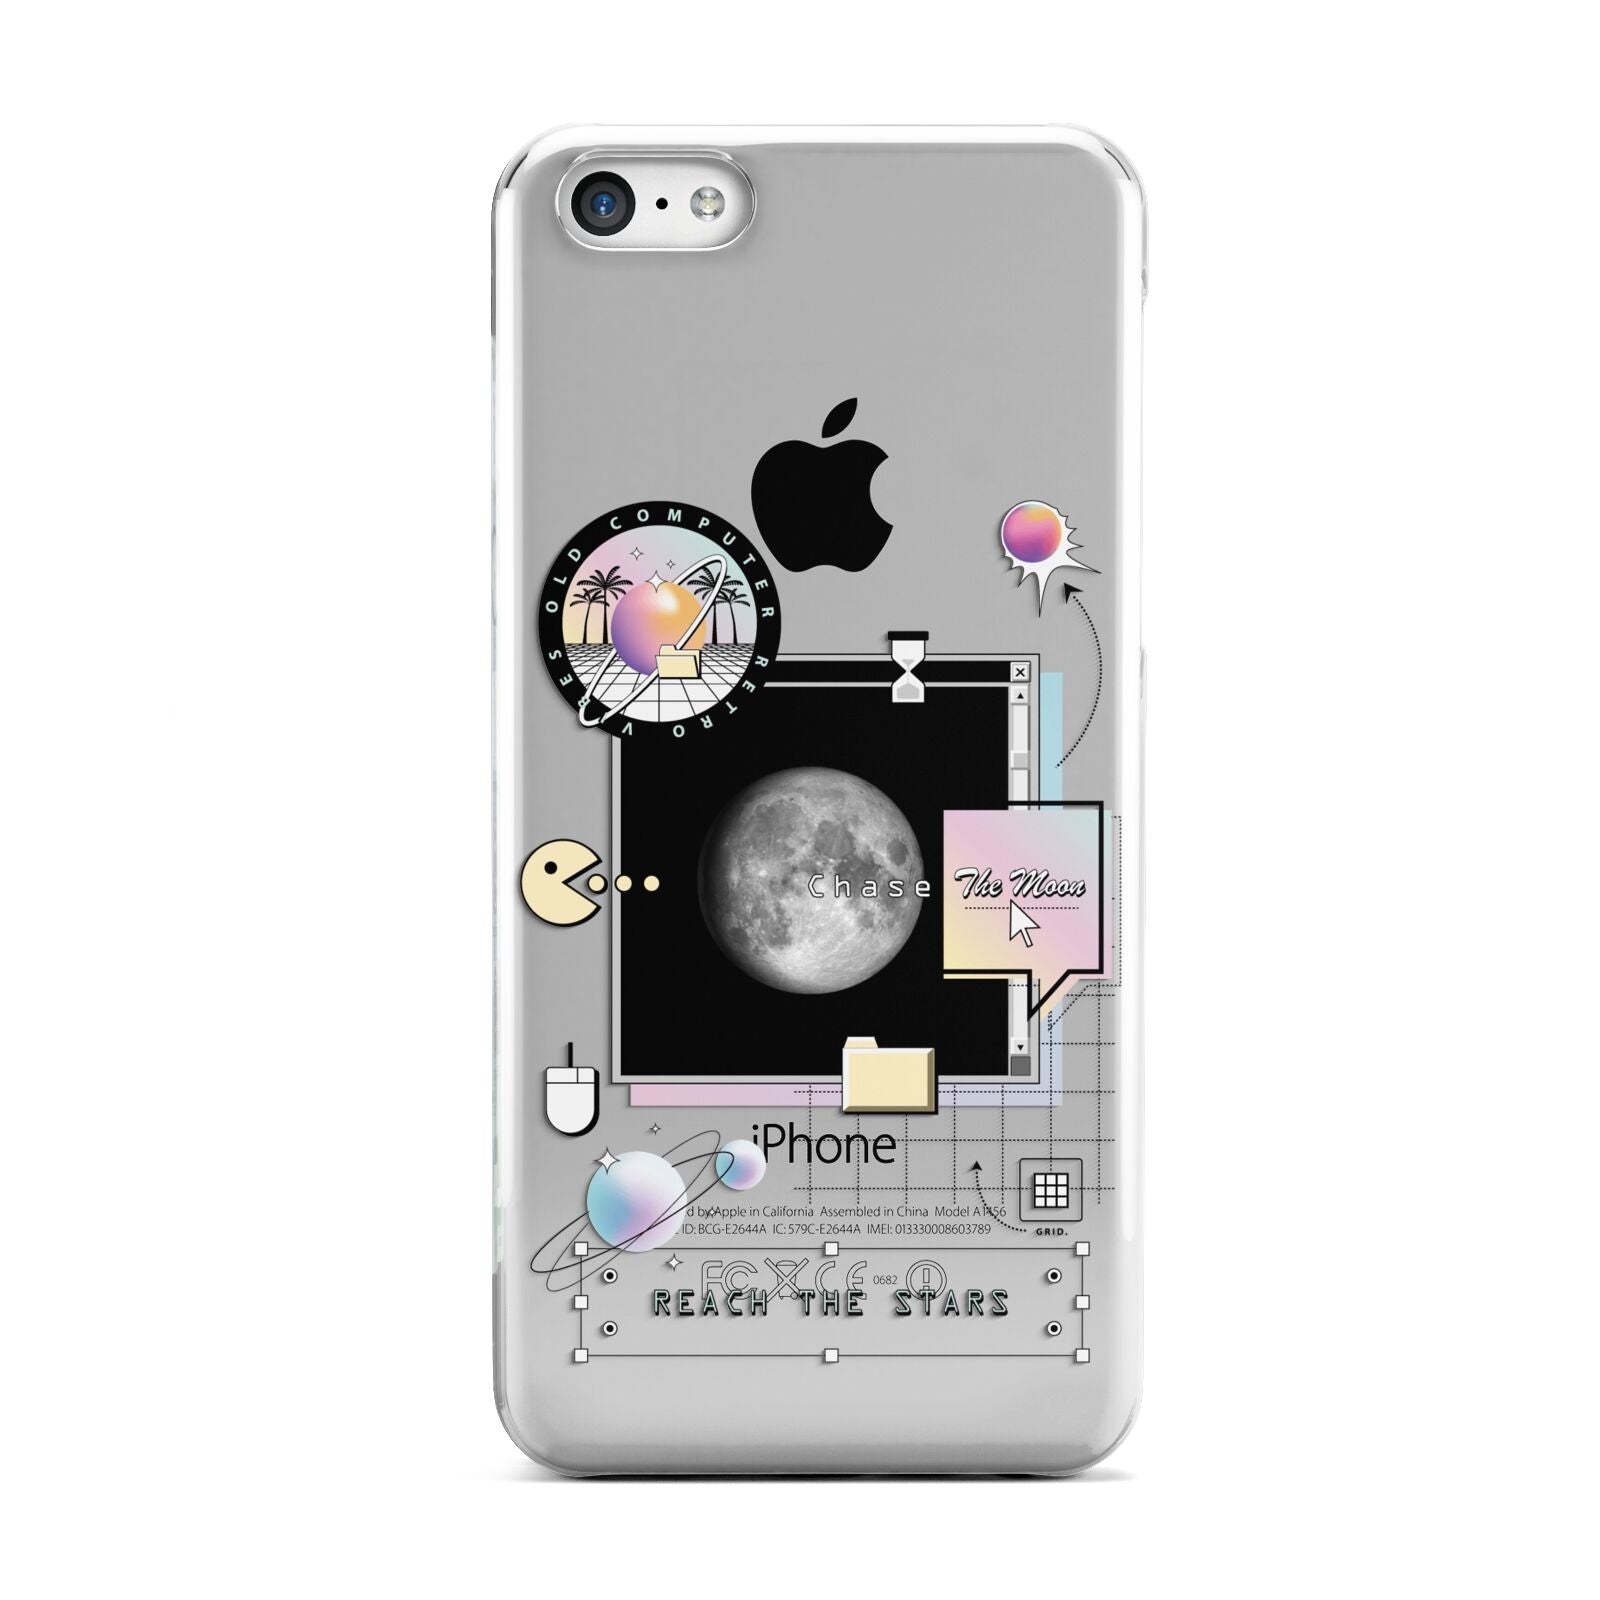 Chase The Moon Apple iPhone 5c Case